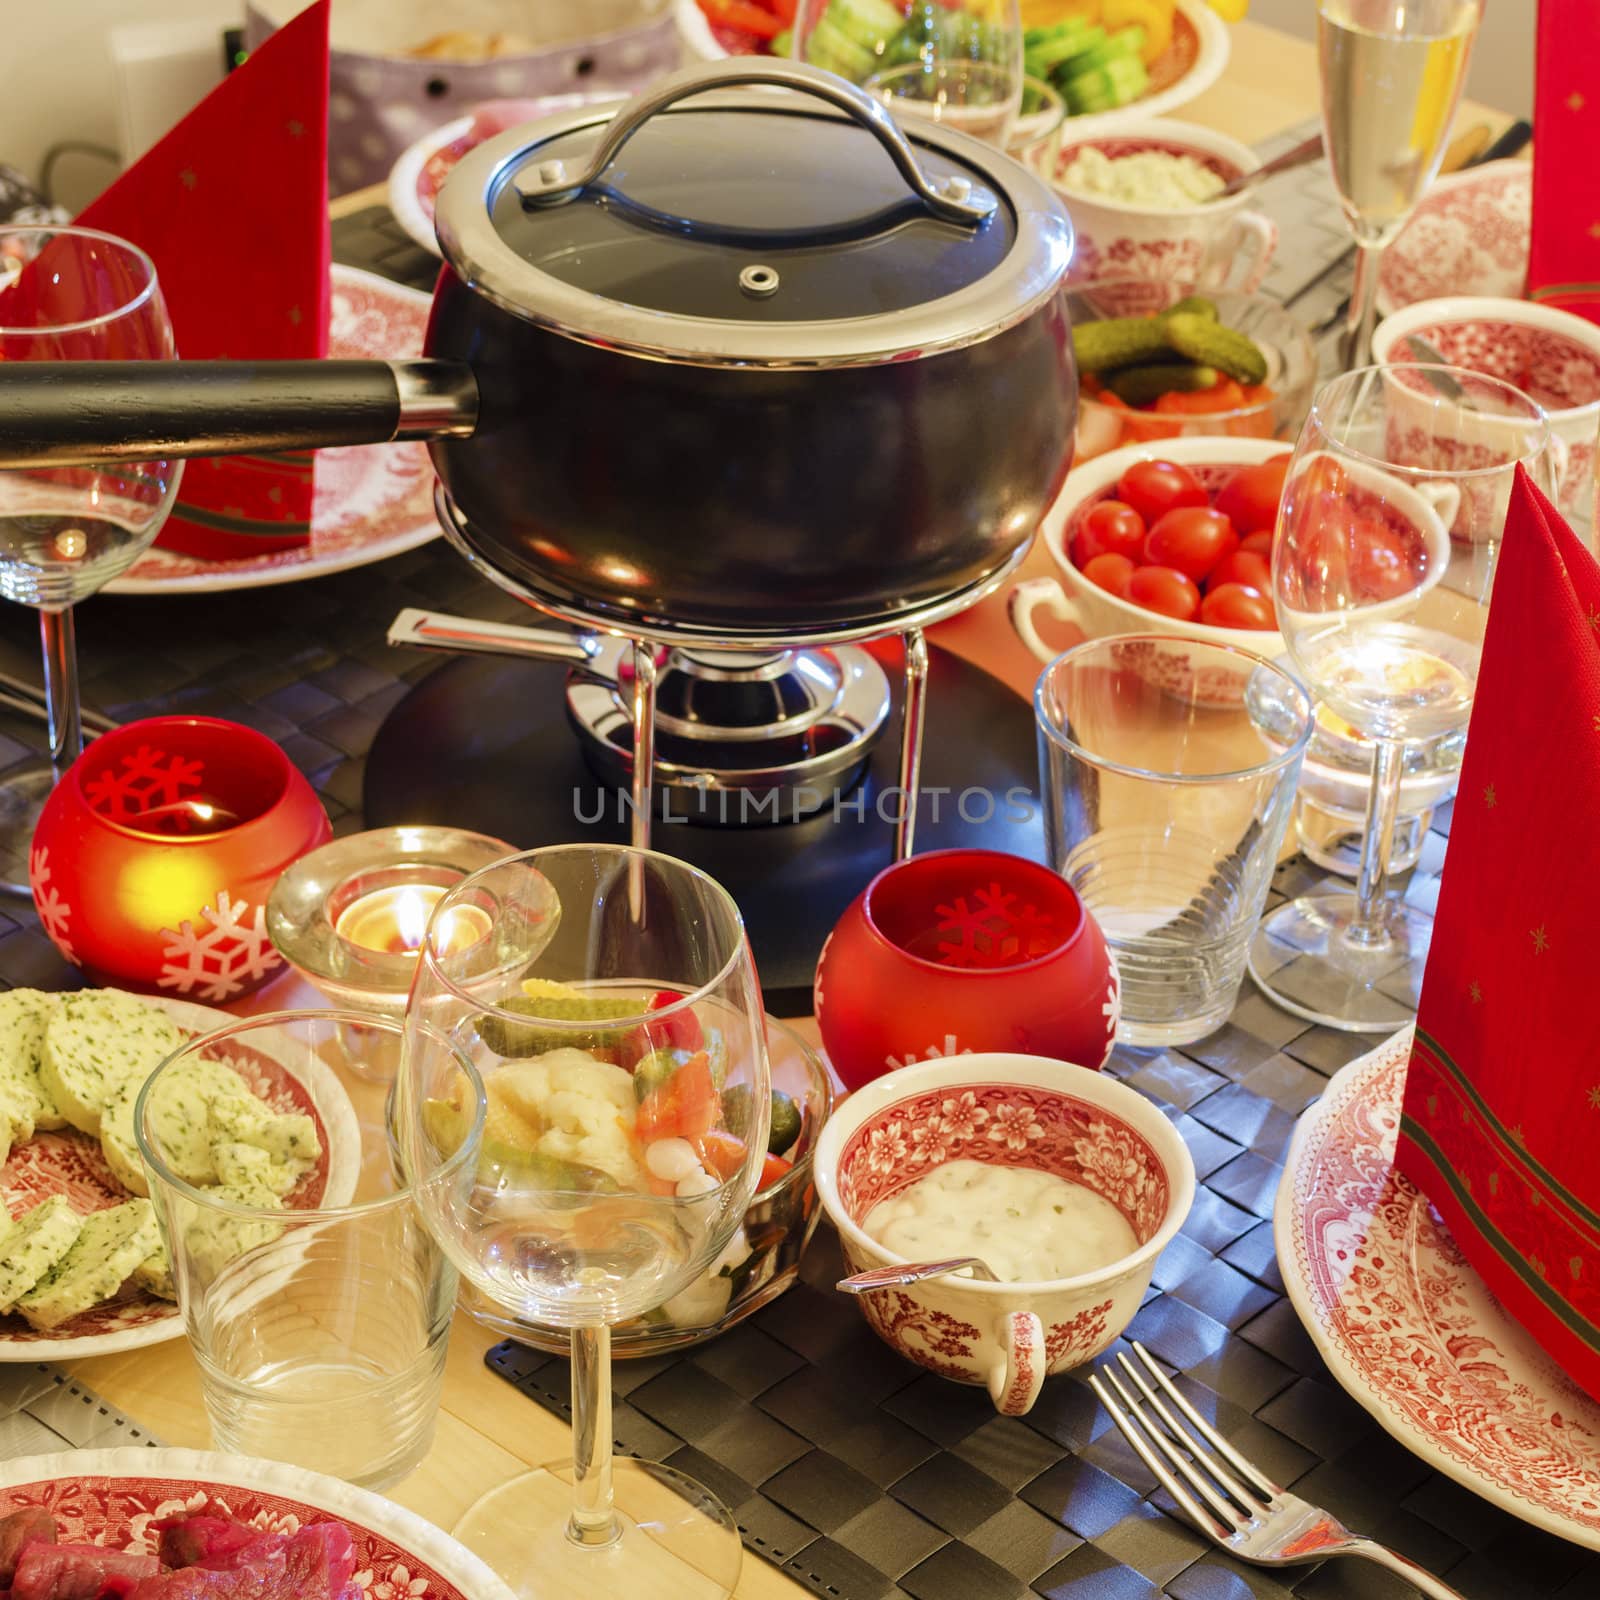 A well-laid table with a fondue caquelon, vegatables and dishes. Square format.